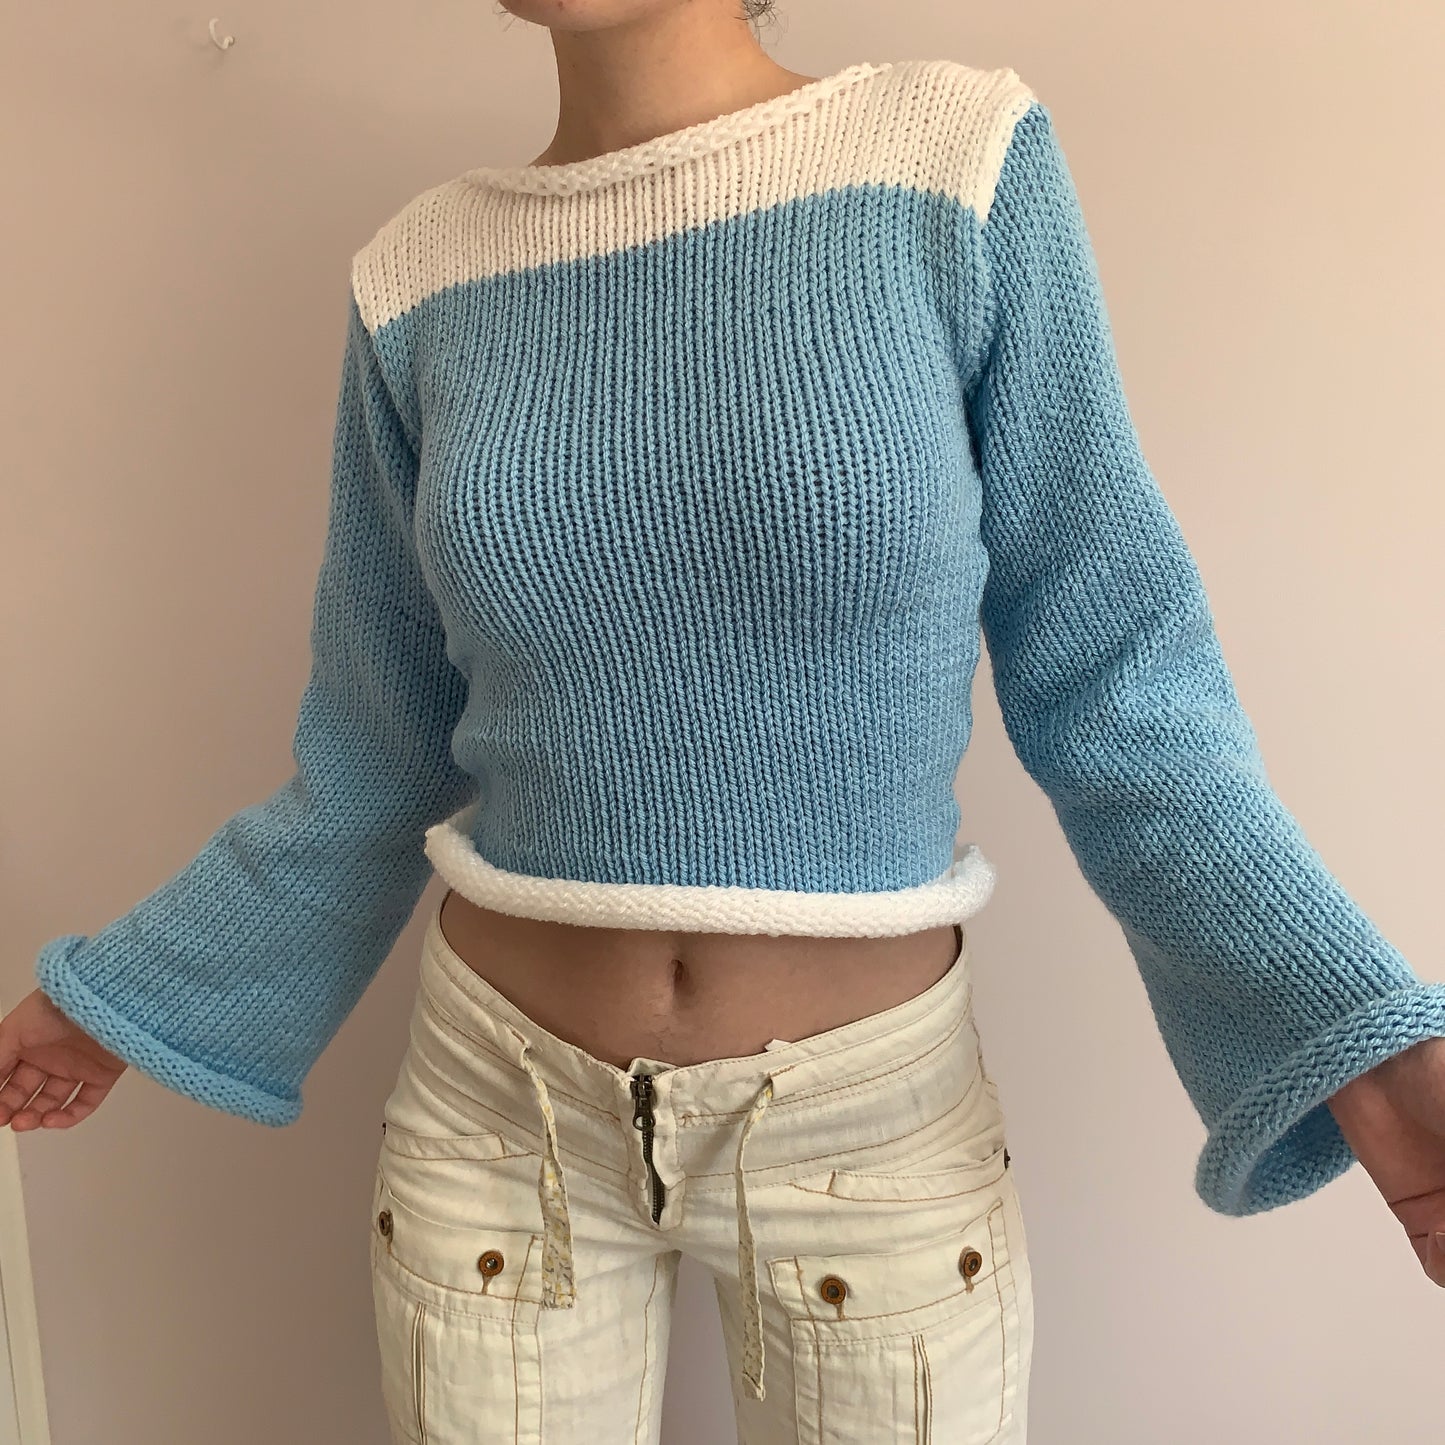 Handmade knitted colour block jumper in baby blue and white